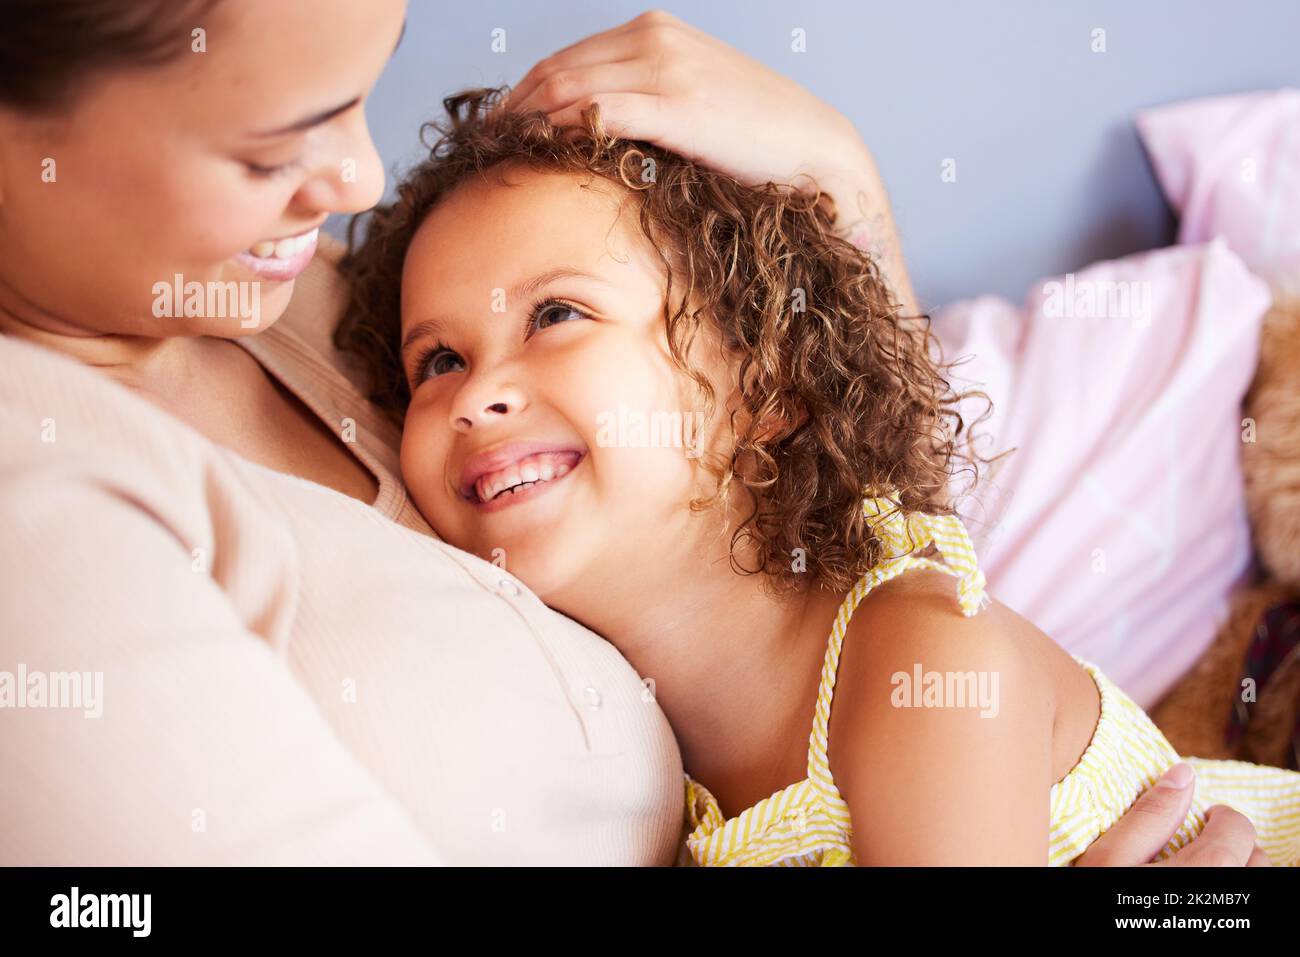 Ill always be here for you baby. Shot of a mother and daughter spending quality time together. Stock Photo